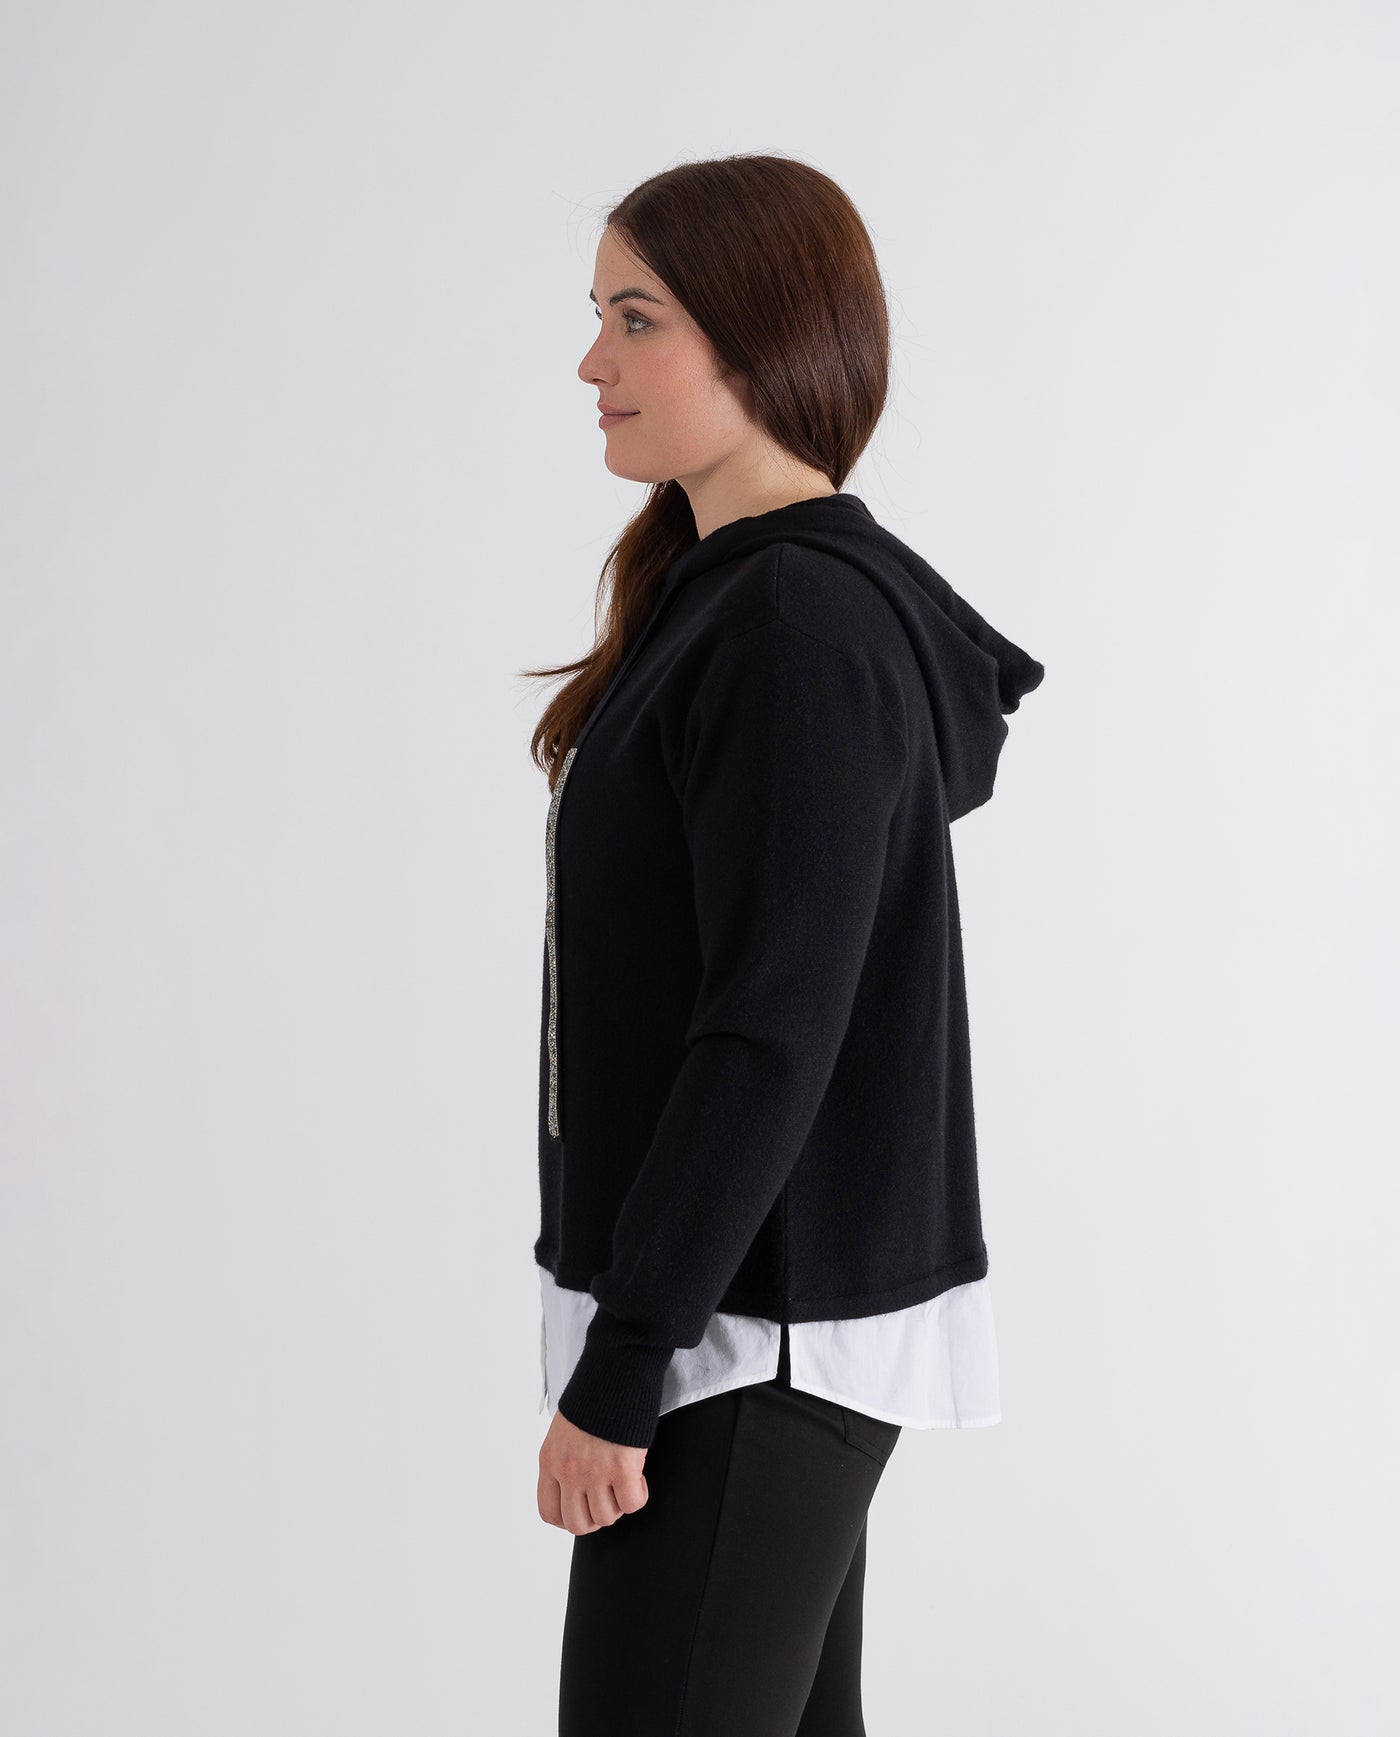 KNIT SWEATSHIRT WITH STRASS RIBBONS AND BLACK SKIRT